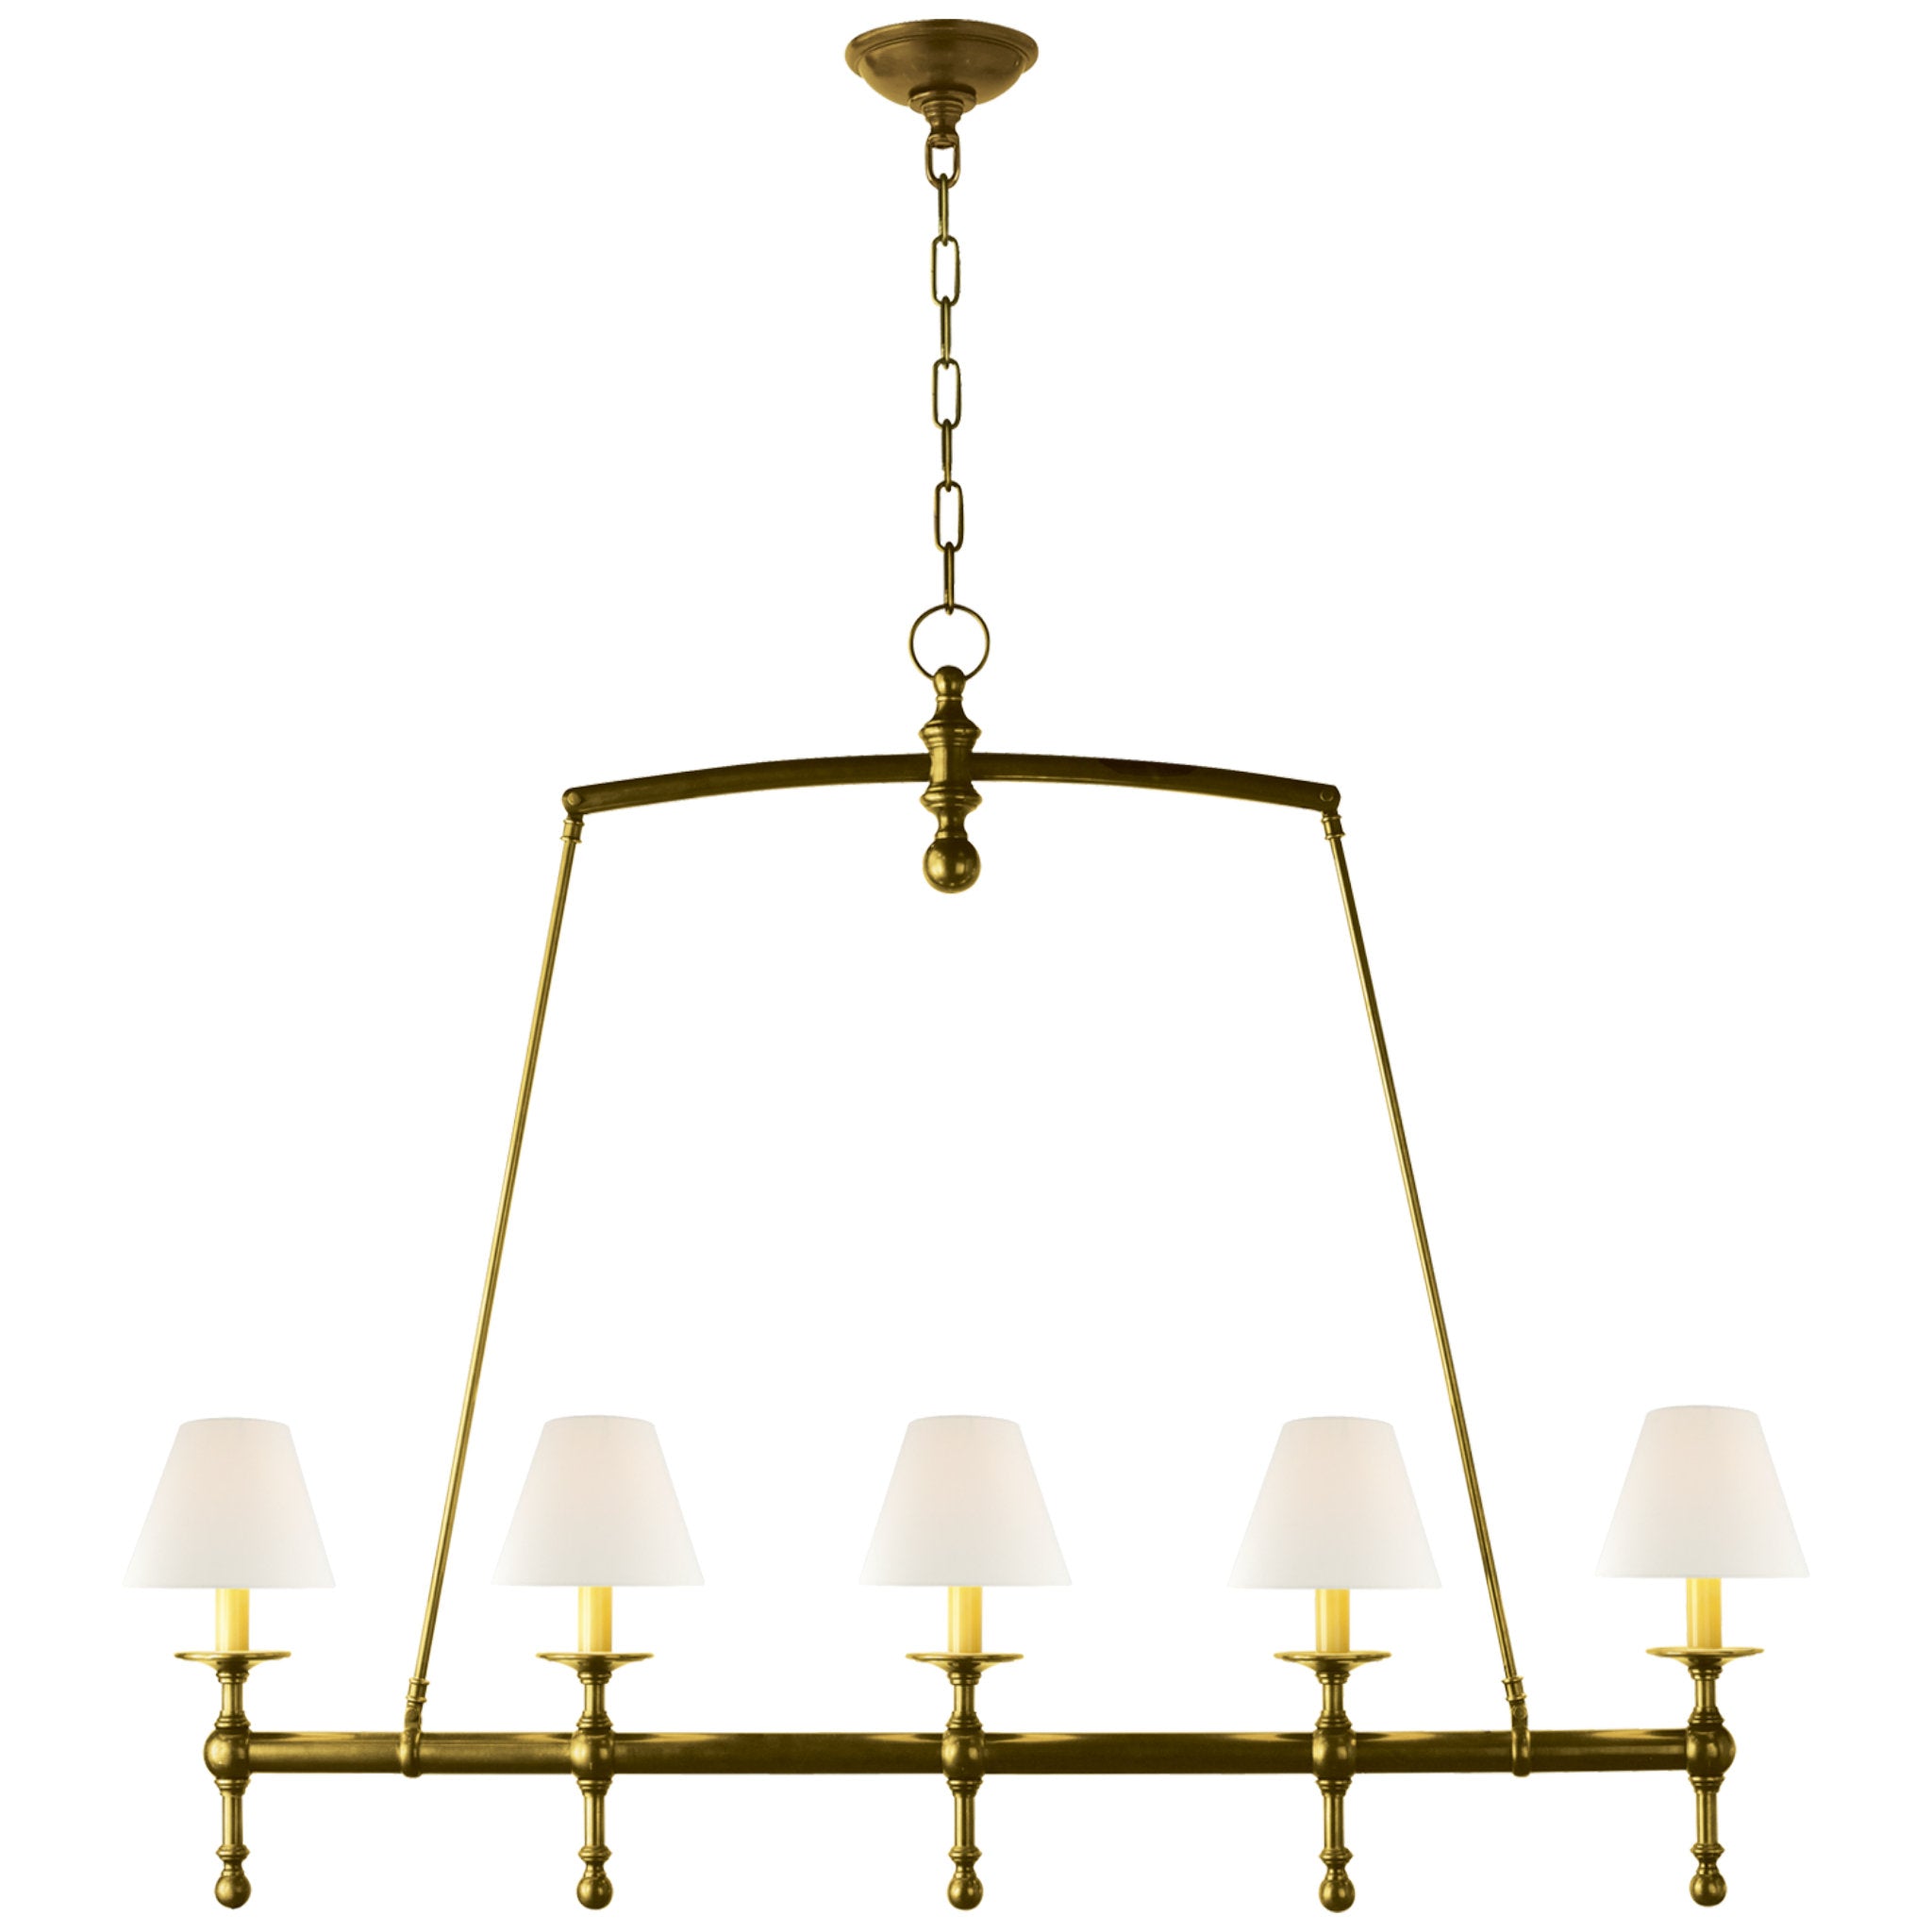 Chapman & Myers Classic Ring Chandelier in Hand-Rubbed Antique Brass w